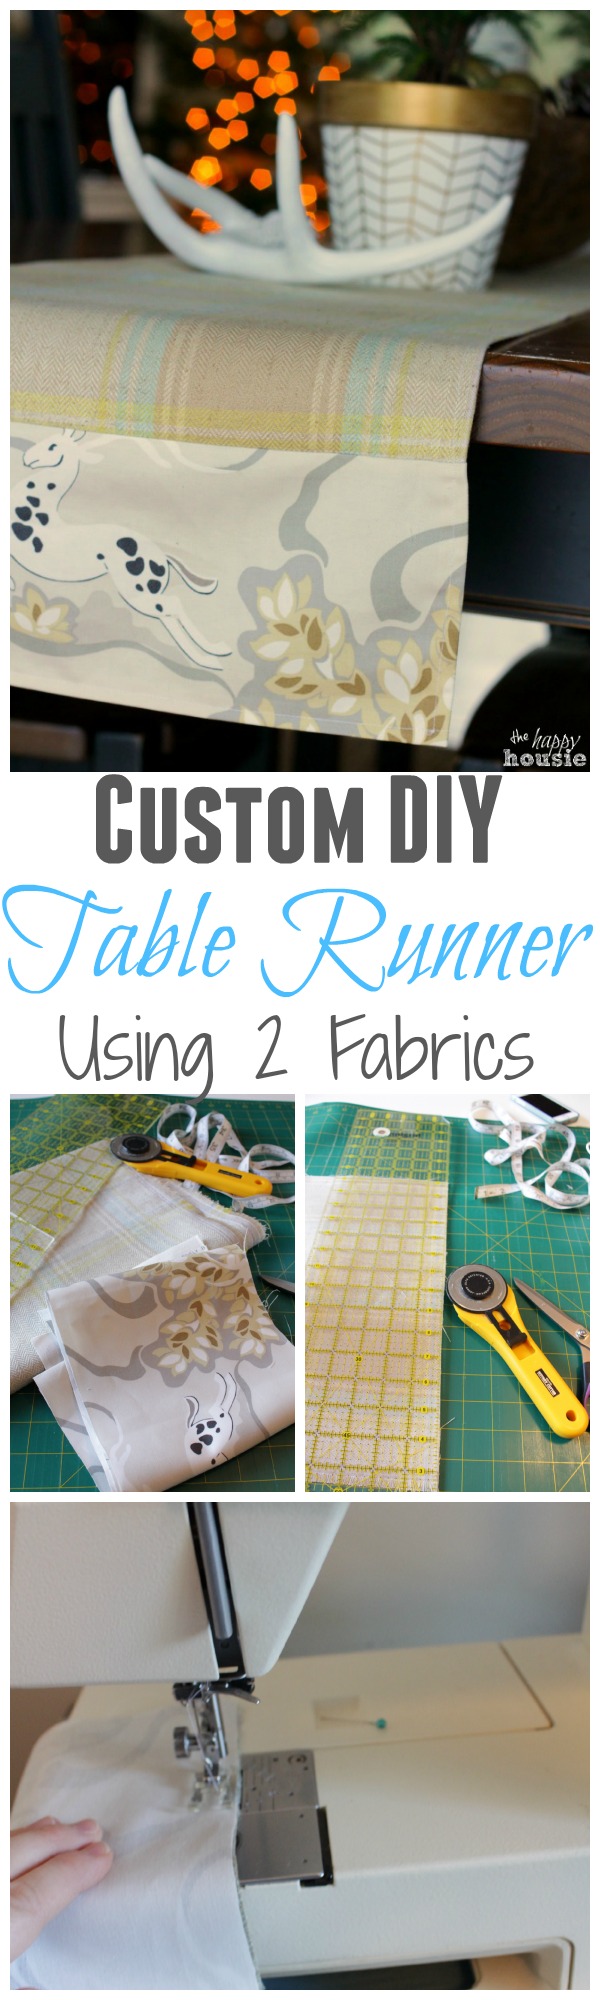 How to Make your own Custom DIY Table Runner using two fabrics perfect for your Christmas or Holiday table with full tutorial at The Happy Housie